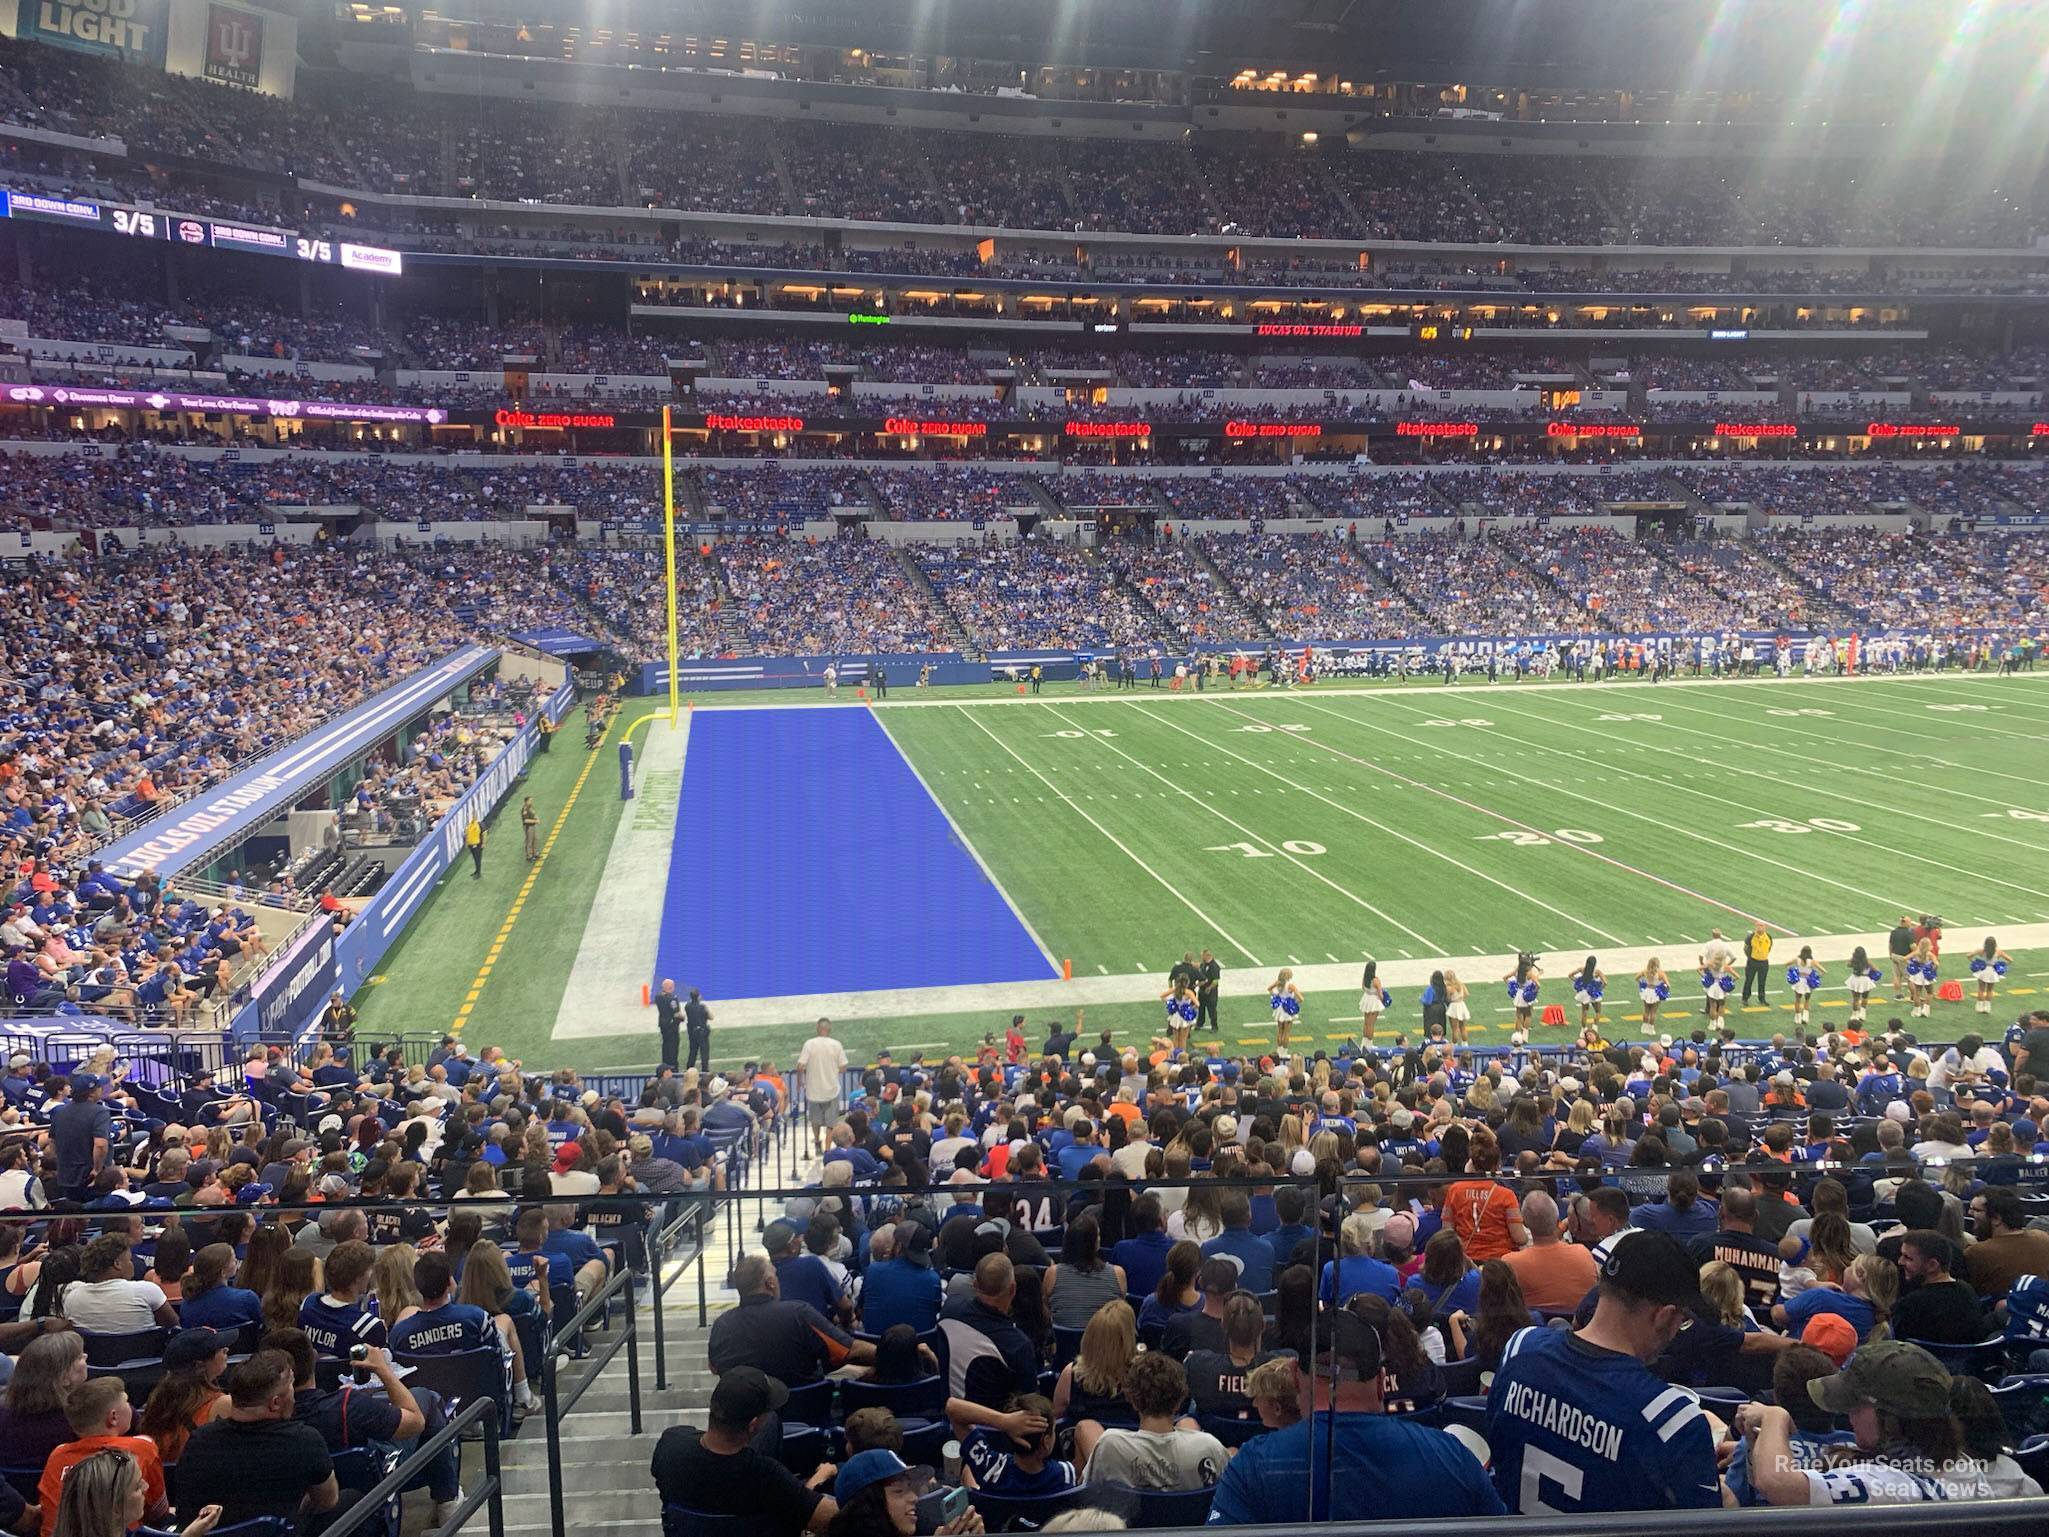 section 217, row 1 seat view  for football - lucas oil stadium